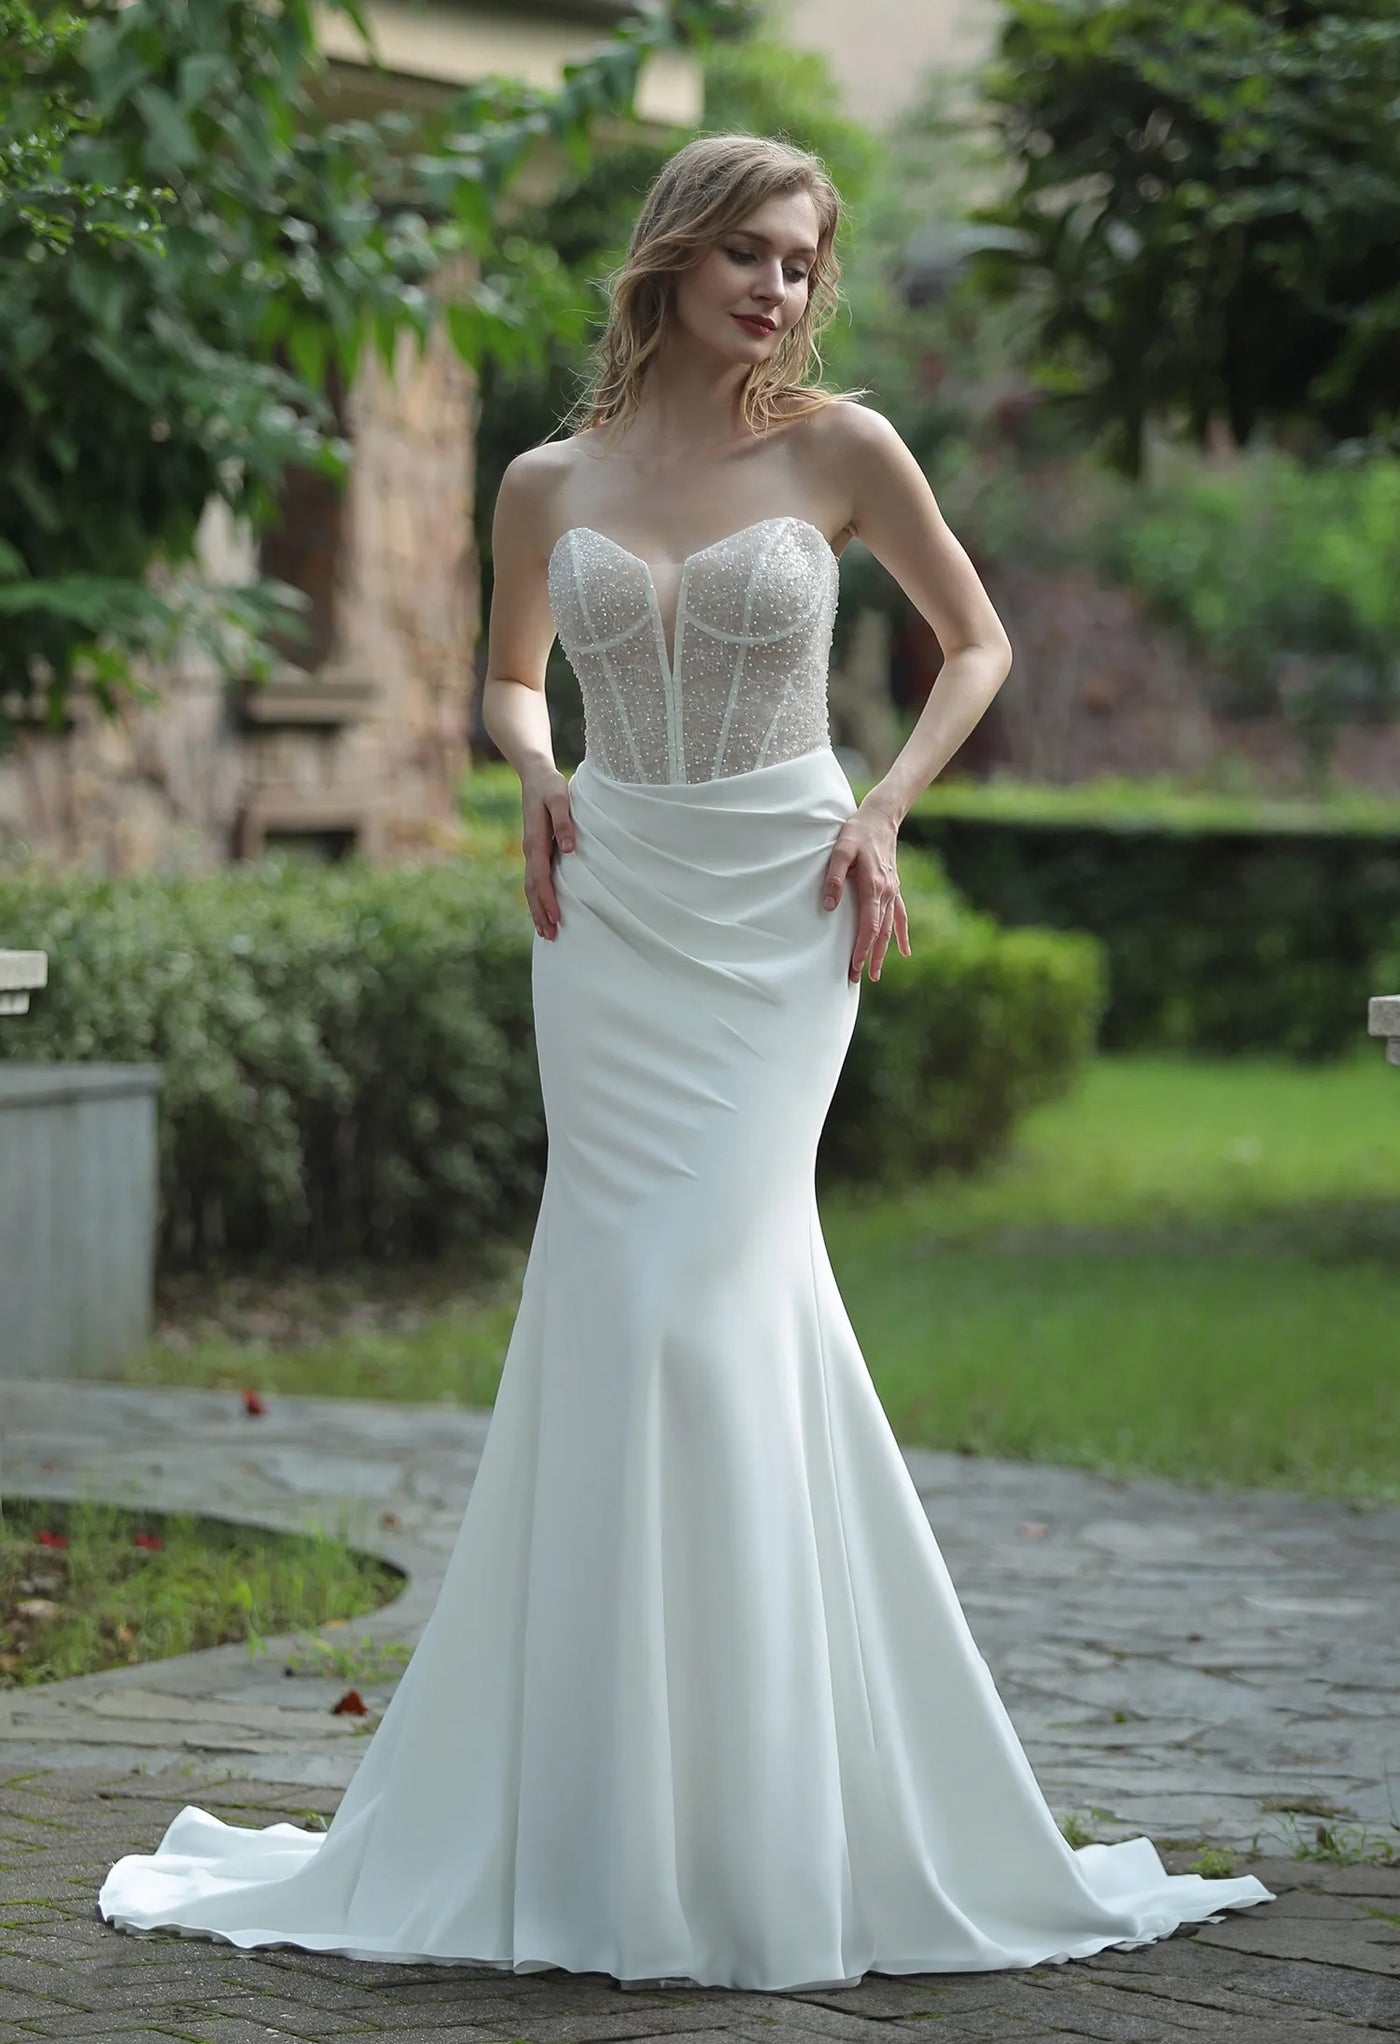 A woman in a Bergamot Bridal plunging sweetheart neckline beaded crepe fit and flare wedding dress with a fitted bodice and mermaid silhouette, posing outdoors.